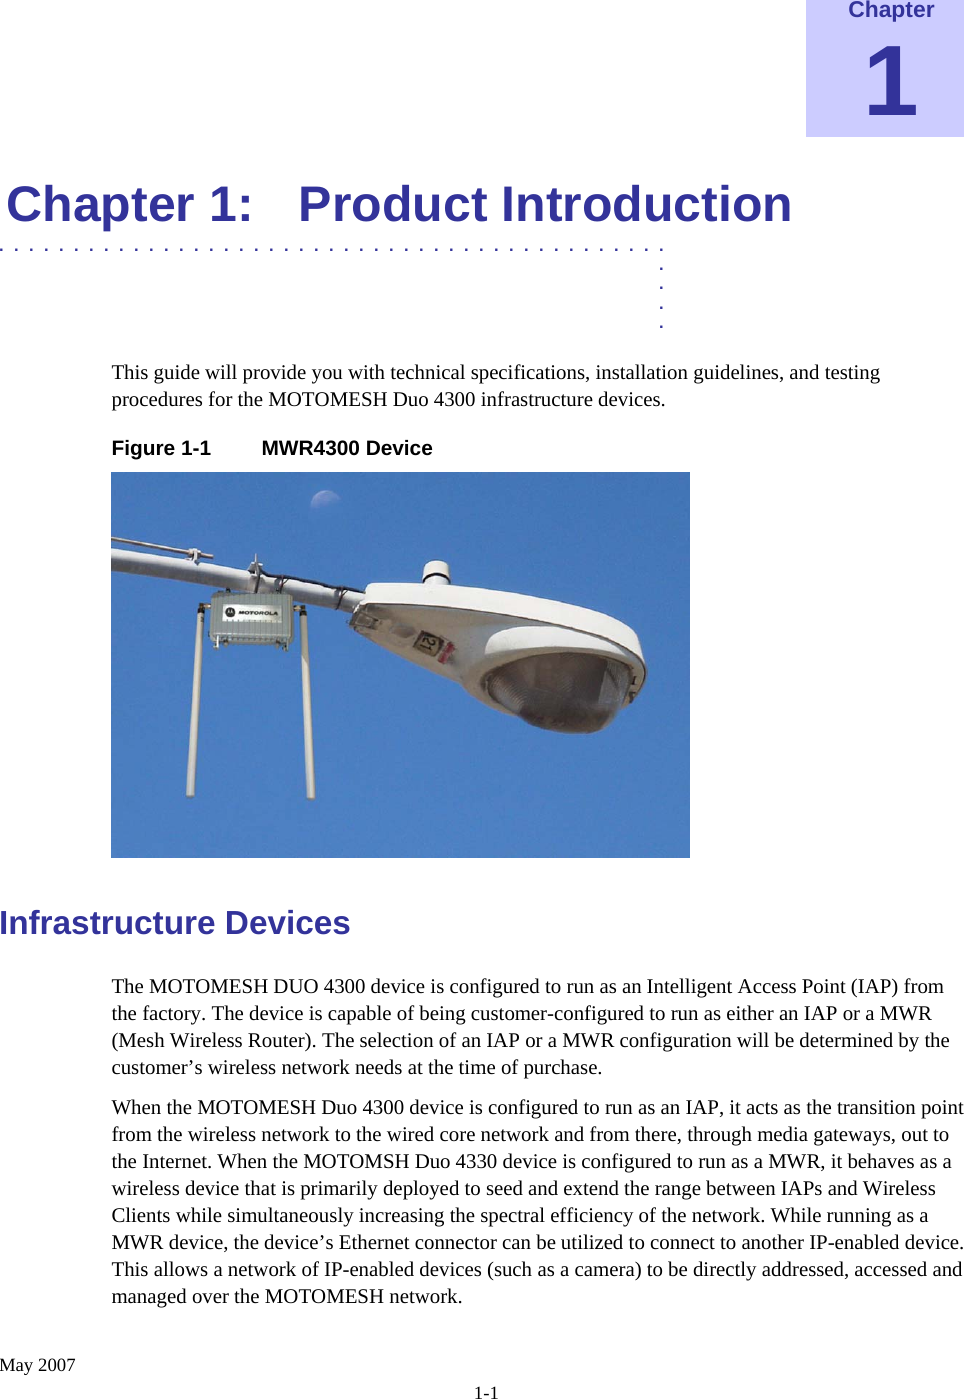    May 2007 1-1 Chapter 1 Chapter 1:  Product Introduction  .............................................  .  .  .  . This guide will provide you with technical specifications, installation guidelines, and testing procedures for the MOTOMESH Duo 4300 infrastructure devices. Figure 1-1  MWR4300 Device   Infrastructure Devices The MOTOMESH DUO 4300 device is configured to run as an Intelligent Access Point (IAP) from the factory. The device is capable of being customer-configured to run as either an IAP or a MWR (Mesh Wireless Router). The selection of an IAP or a MWR configuration will be determined by the customer’s wireless network needs at the time of purchase. When the MOTOMESH Duo 4300 device is configured to run as an IAP, it acts as the transition point from the wireless network to the wired core network and from there, through media gateways, out to the Internet. When the MOTOMSH Duo 4330 device is configured to run as a MWR, it behaves as a wireless device that is primarily deployed to seed and extend the range between IAPs and Wireless Clients while simultaneously increasing the spectral efficiency of the network. While running as a MWR device, the device’s Ethernet connector can be utilized to connect to another IP-enabled device. This allows a network of IP-enabled devices (such as a camera) to be directly addressed, accessed and managed over the MOTOMESH network.  